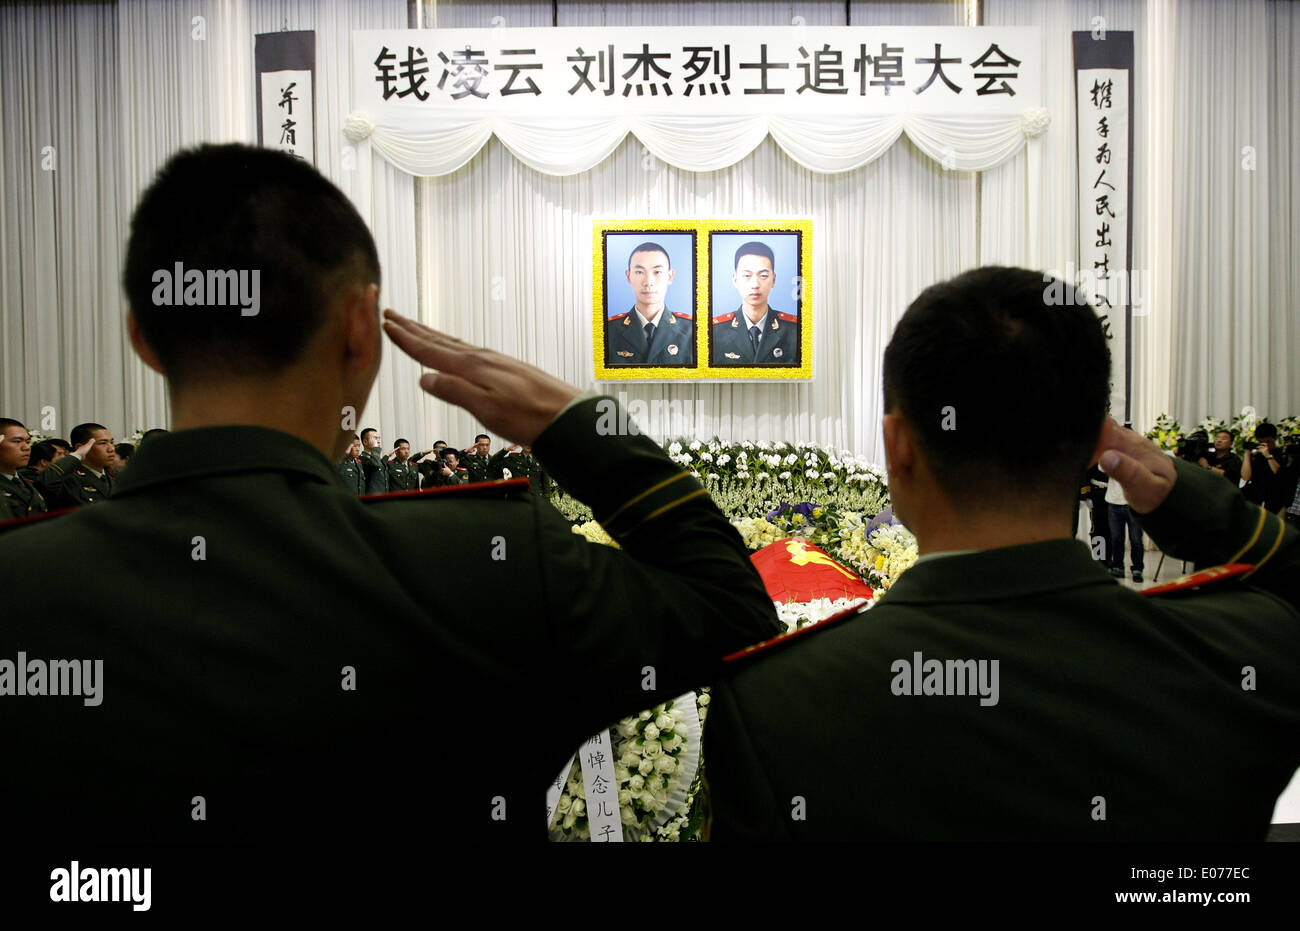 Shanghai, China. 5th May, 2014. Firefighters salute as they mourn for Qian Lingyun and Liu Jie, two young Chinese firefighters who fell to their death during a blaze in a highrise building, at a memorial meeting in Shanghai, east China, May 5, 2014. Qian Lingyun and Liu Jie, who were born in 1991 and 1994 respectively, died on May 3 while responding to the fire in an apartment on the 13th floor of the building where a sudden blast occurred and the force blew them through an open window. © Fang Zhe/Xinhua/Alamy Live News Stock Photo